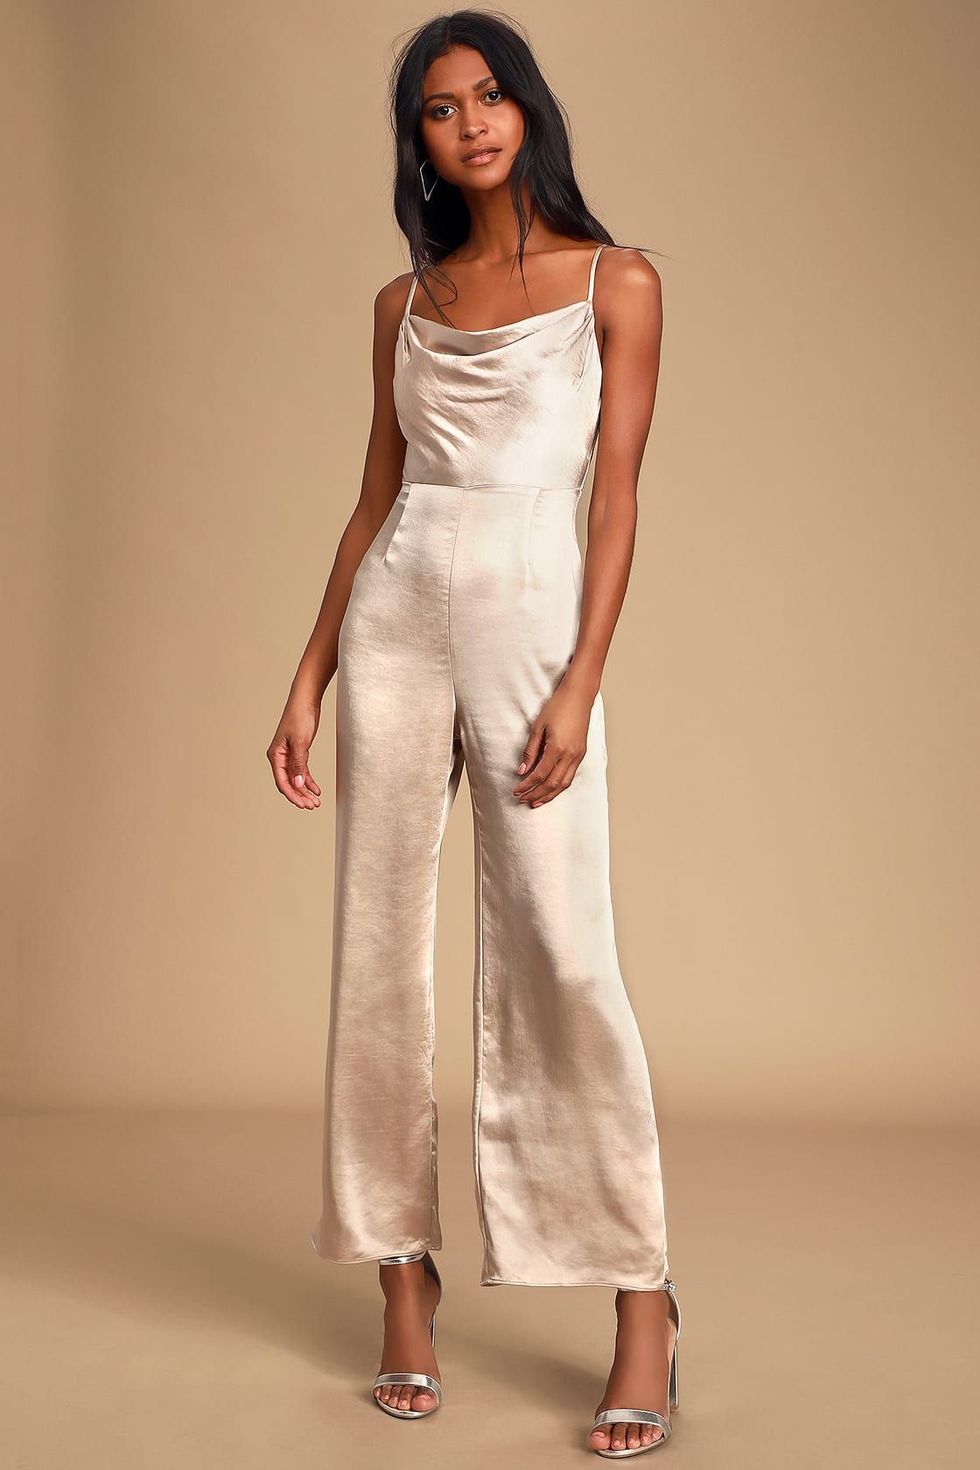 The perfect jumpsuit